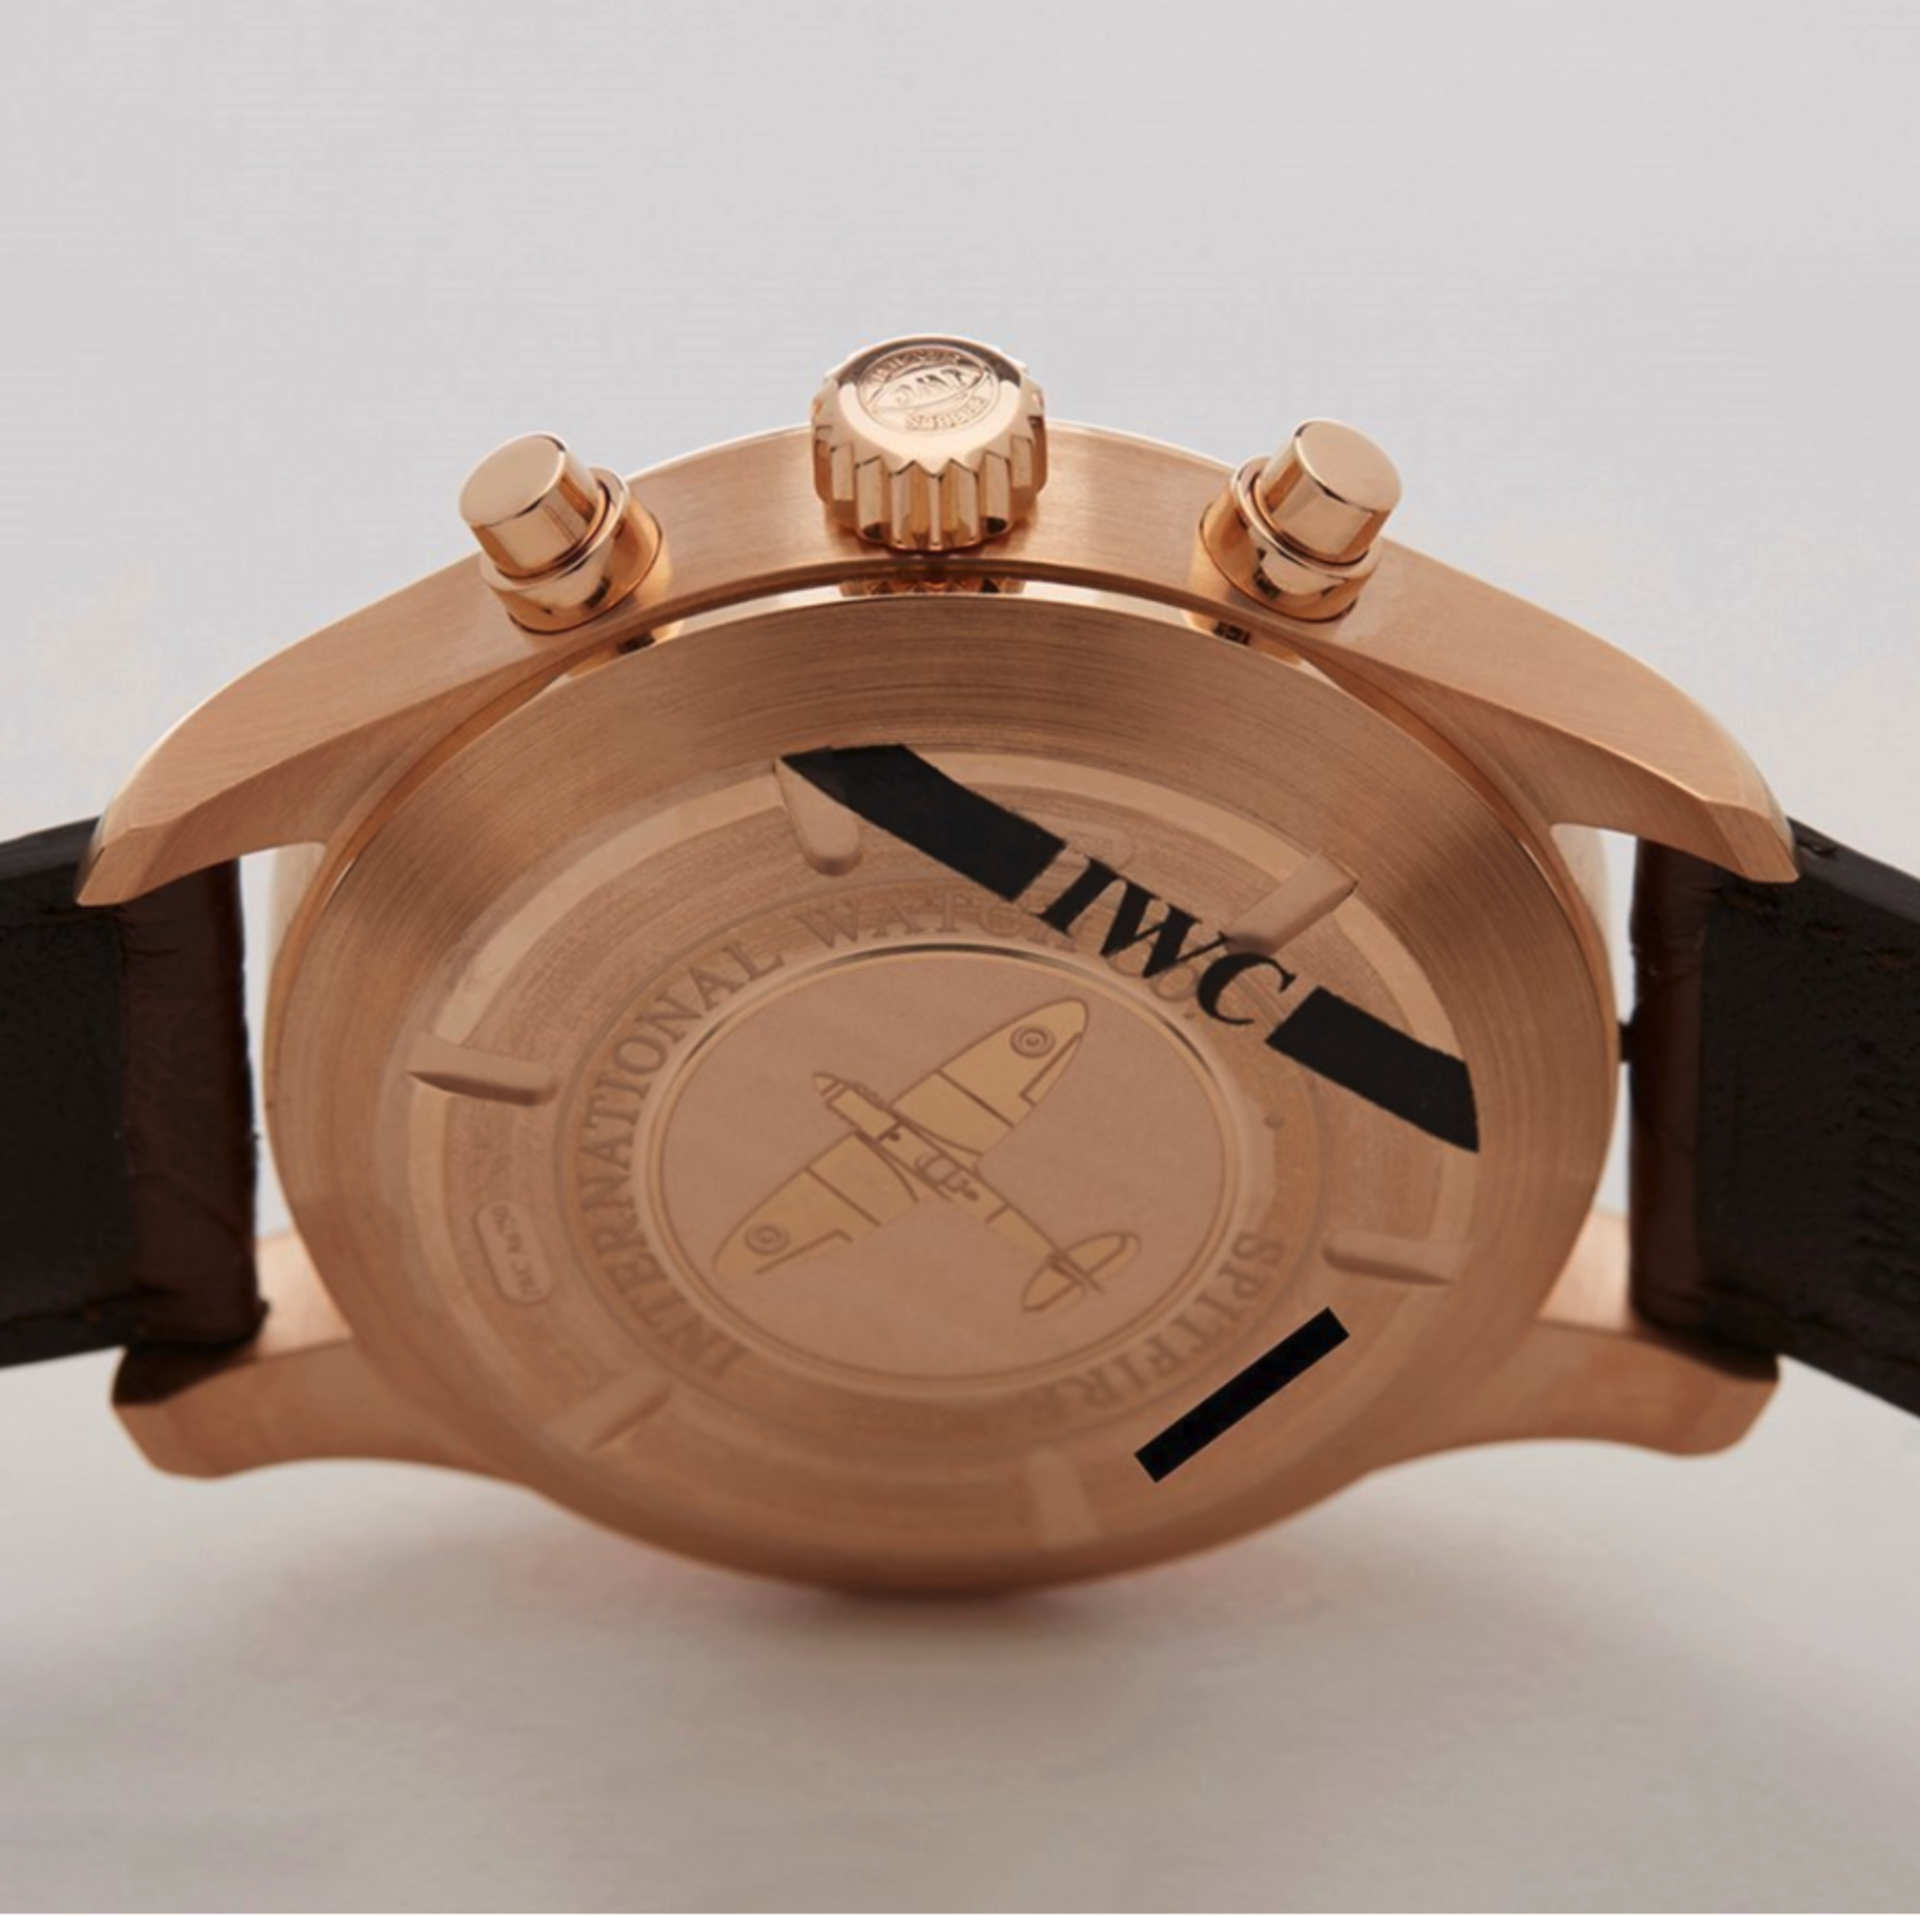 IWC Pilot's Chronograph Spitfire 43mm 18k Rose Gold IW387803 - Image 8 of 9